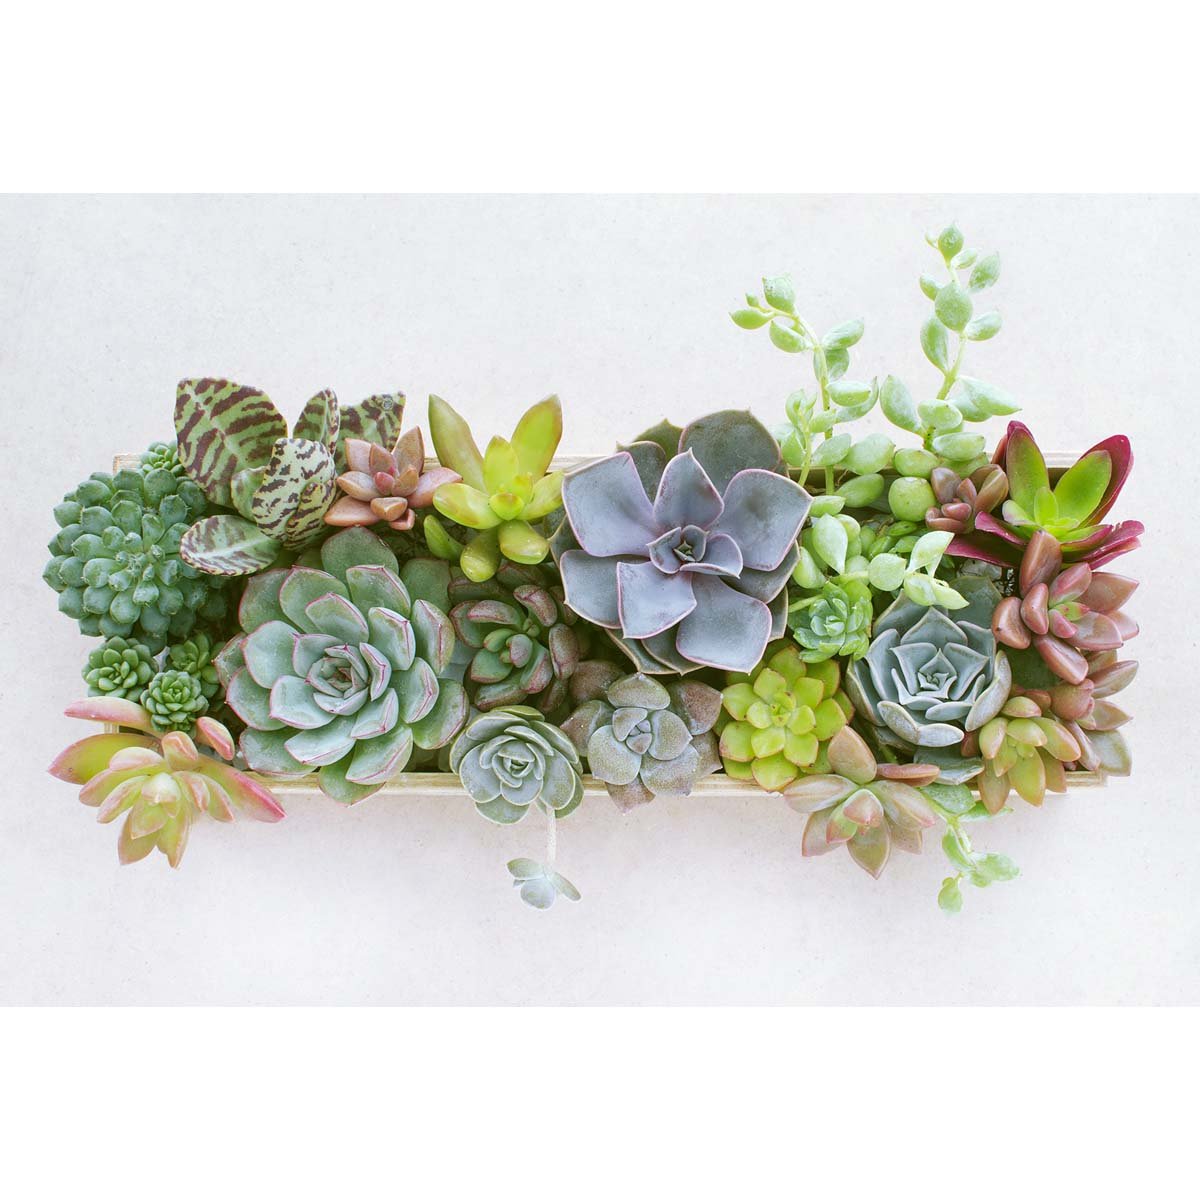 Mother's Day Plant Gifts | Houseplant UK